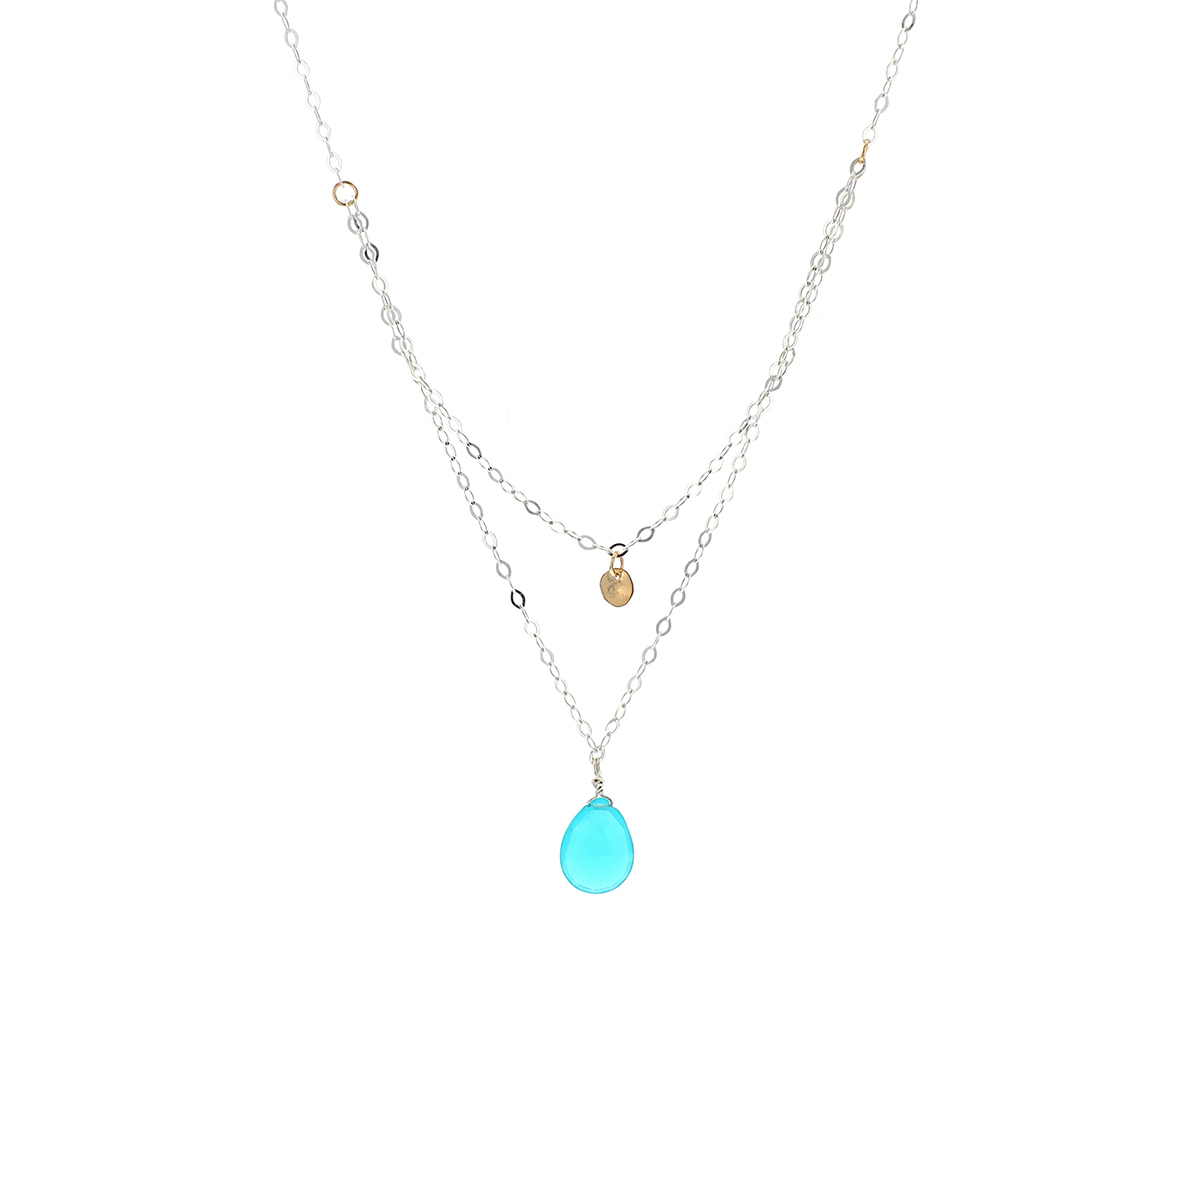 Sterling Silver Two-Tone Double Necklace with Blue Pear-Shape Stone